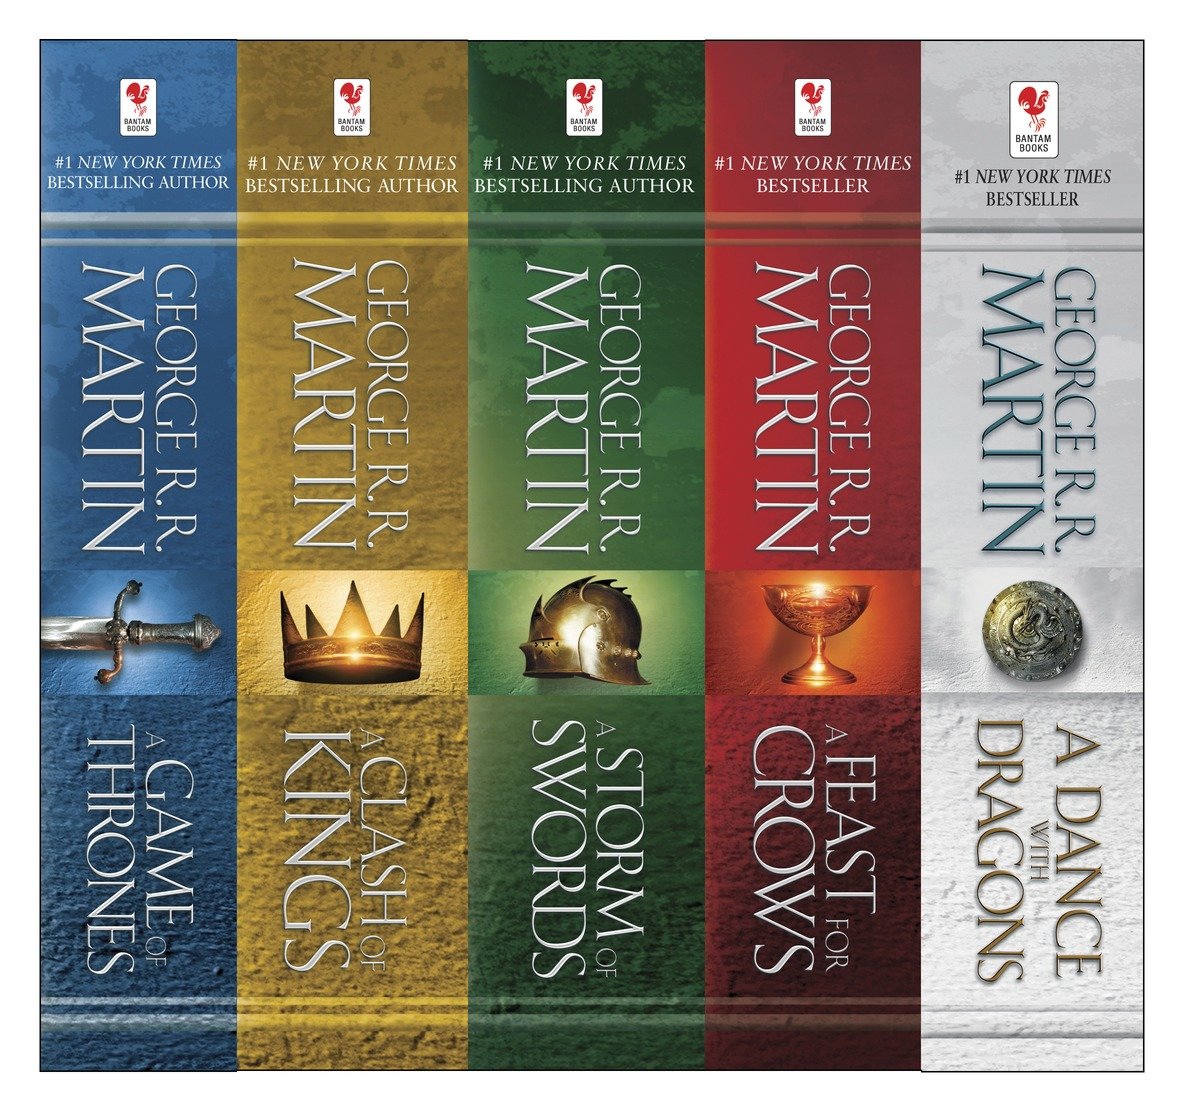 Umschlagbild für George R. R. Martin's A Game of Thrones 5-Book Boxed Set (Song of Ice and Fire Series) [electronic resource] : A Game of Thrones, A Clash of Kings, A Storm of Swords, A Feast for Crows, and A Dance with Dragons